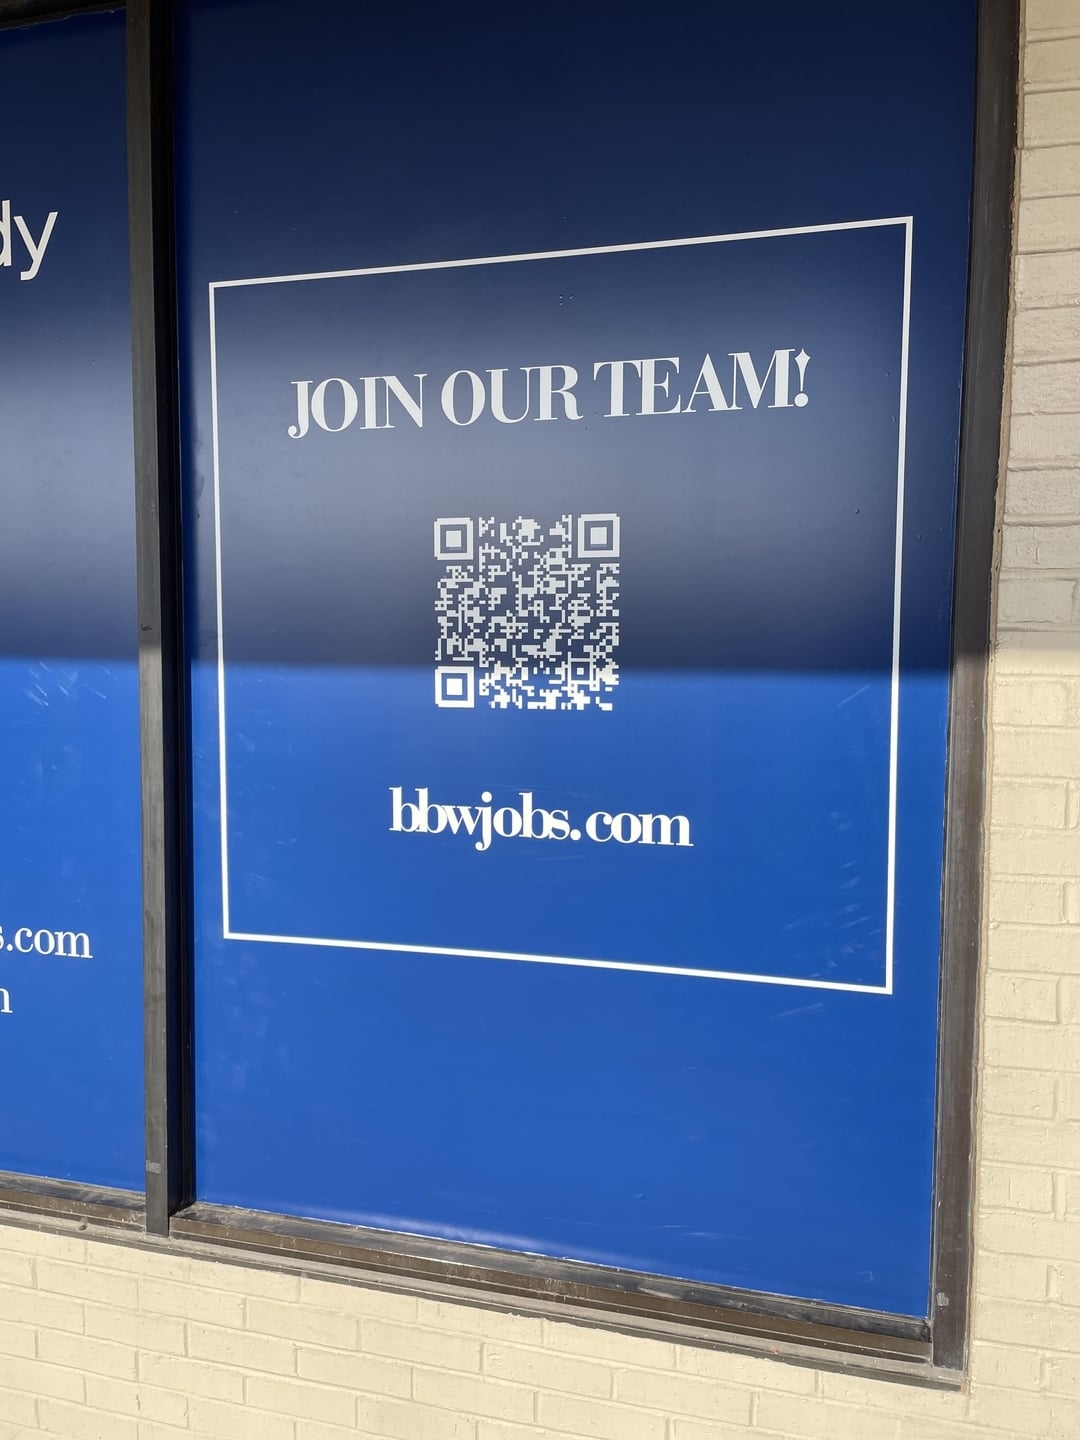 A blue sign with &quot;Join our team!&quot; and a QR code. The website bbwjobs.com is displayed at the bottom, but it looks like &quot;blowjobs.com&quot;